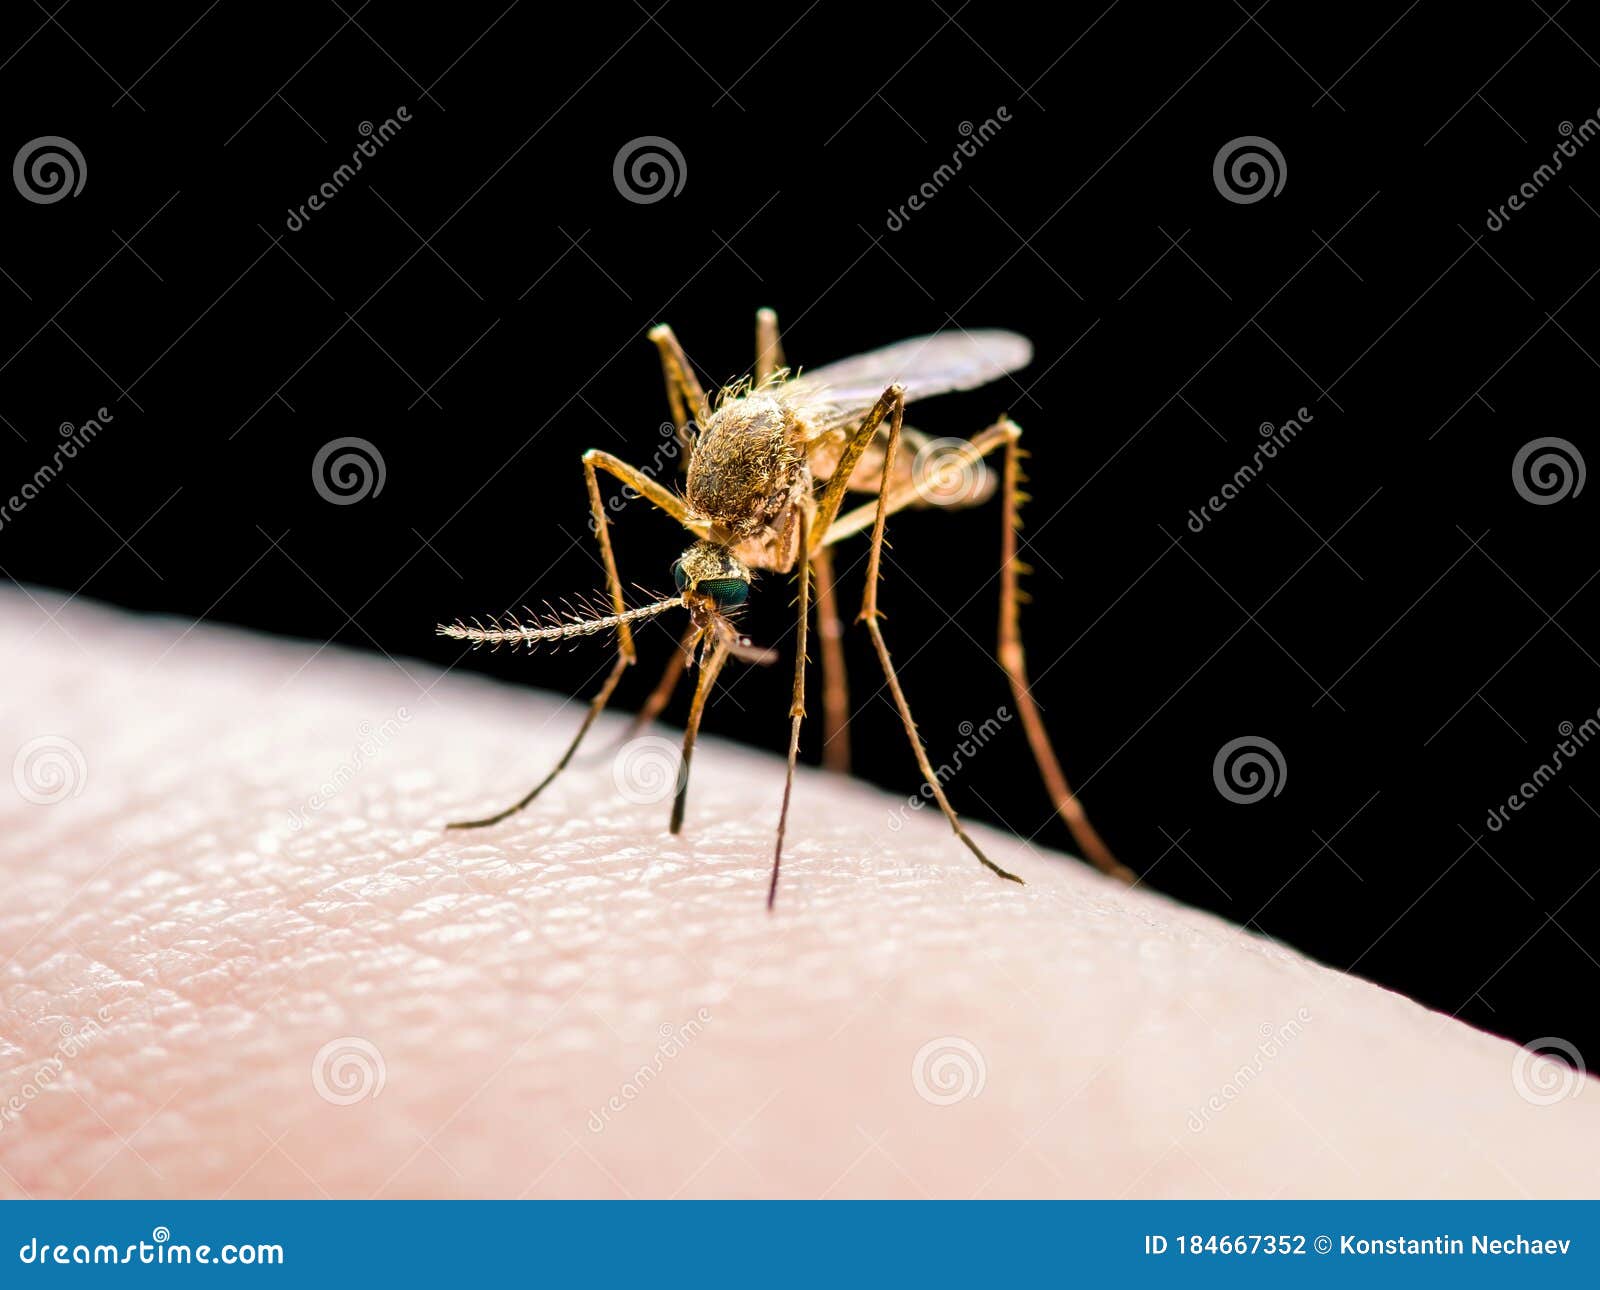 yellow fever, malaria or zika virus infected mosquito insect bite  on black